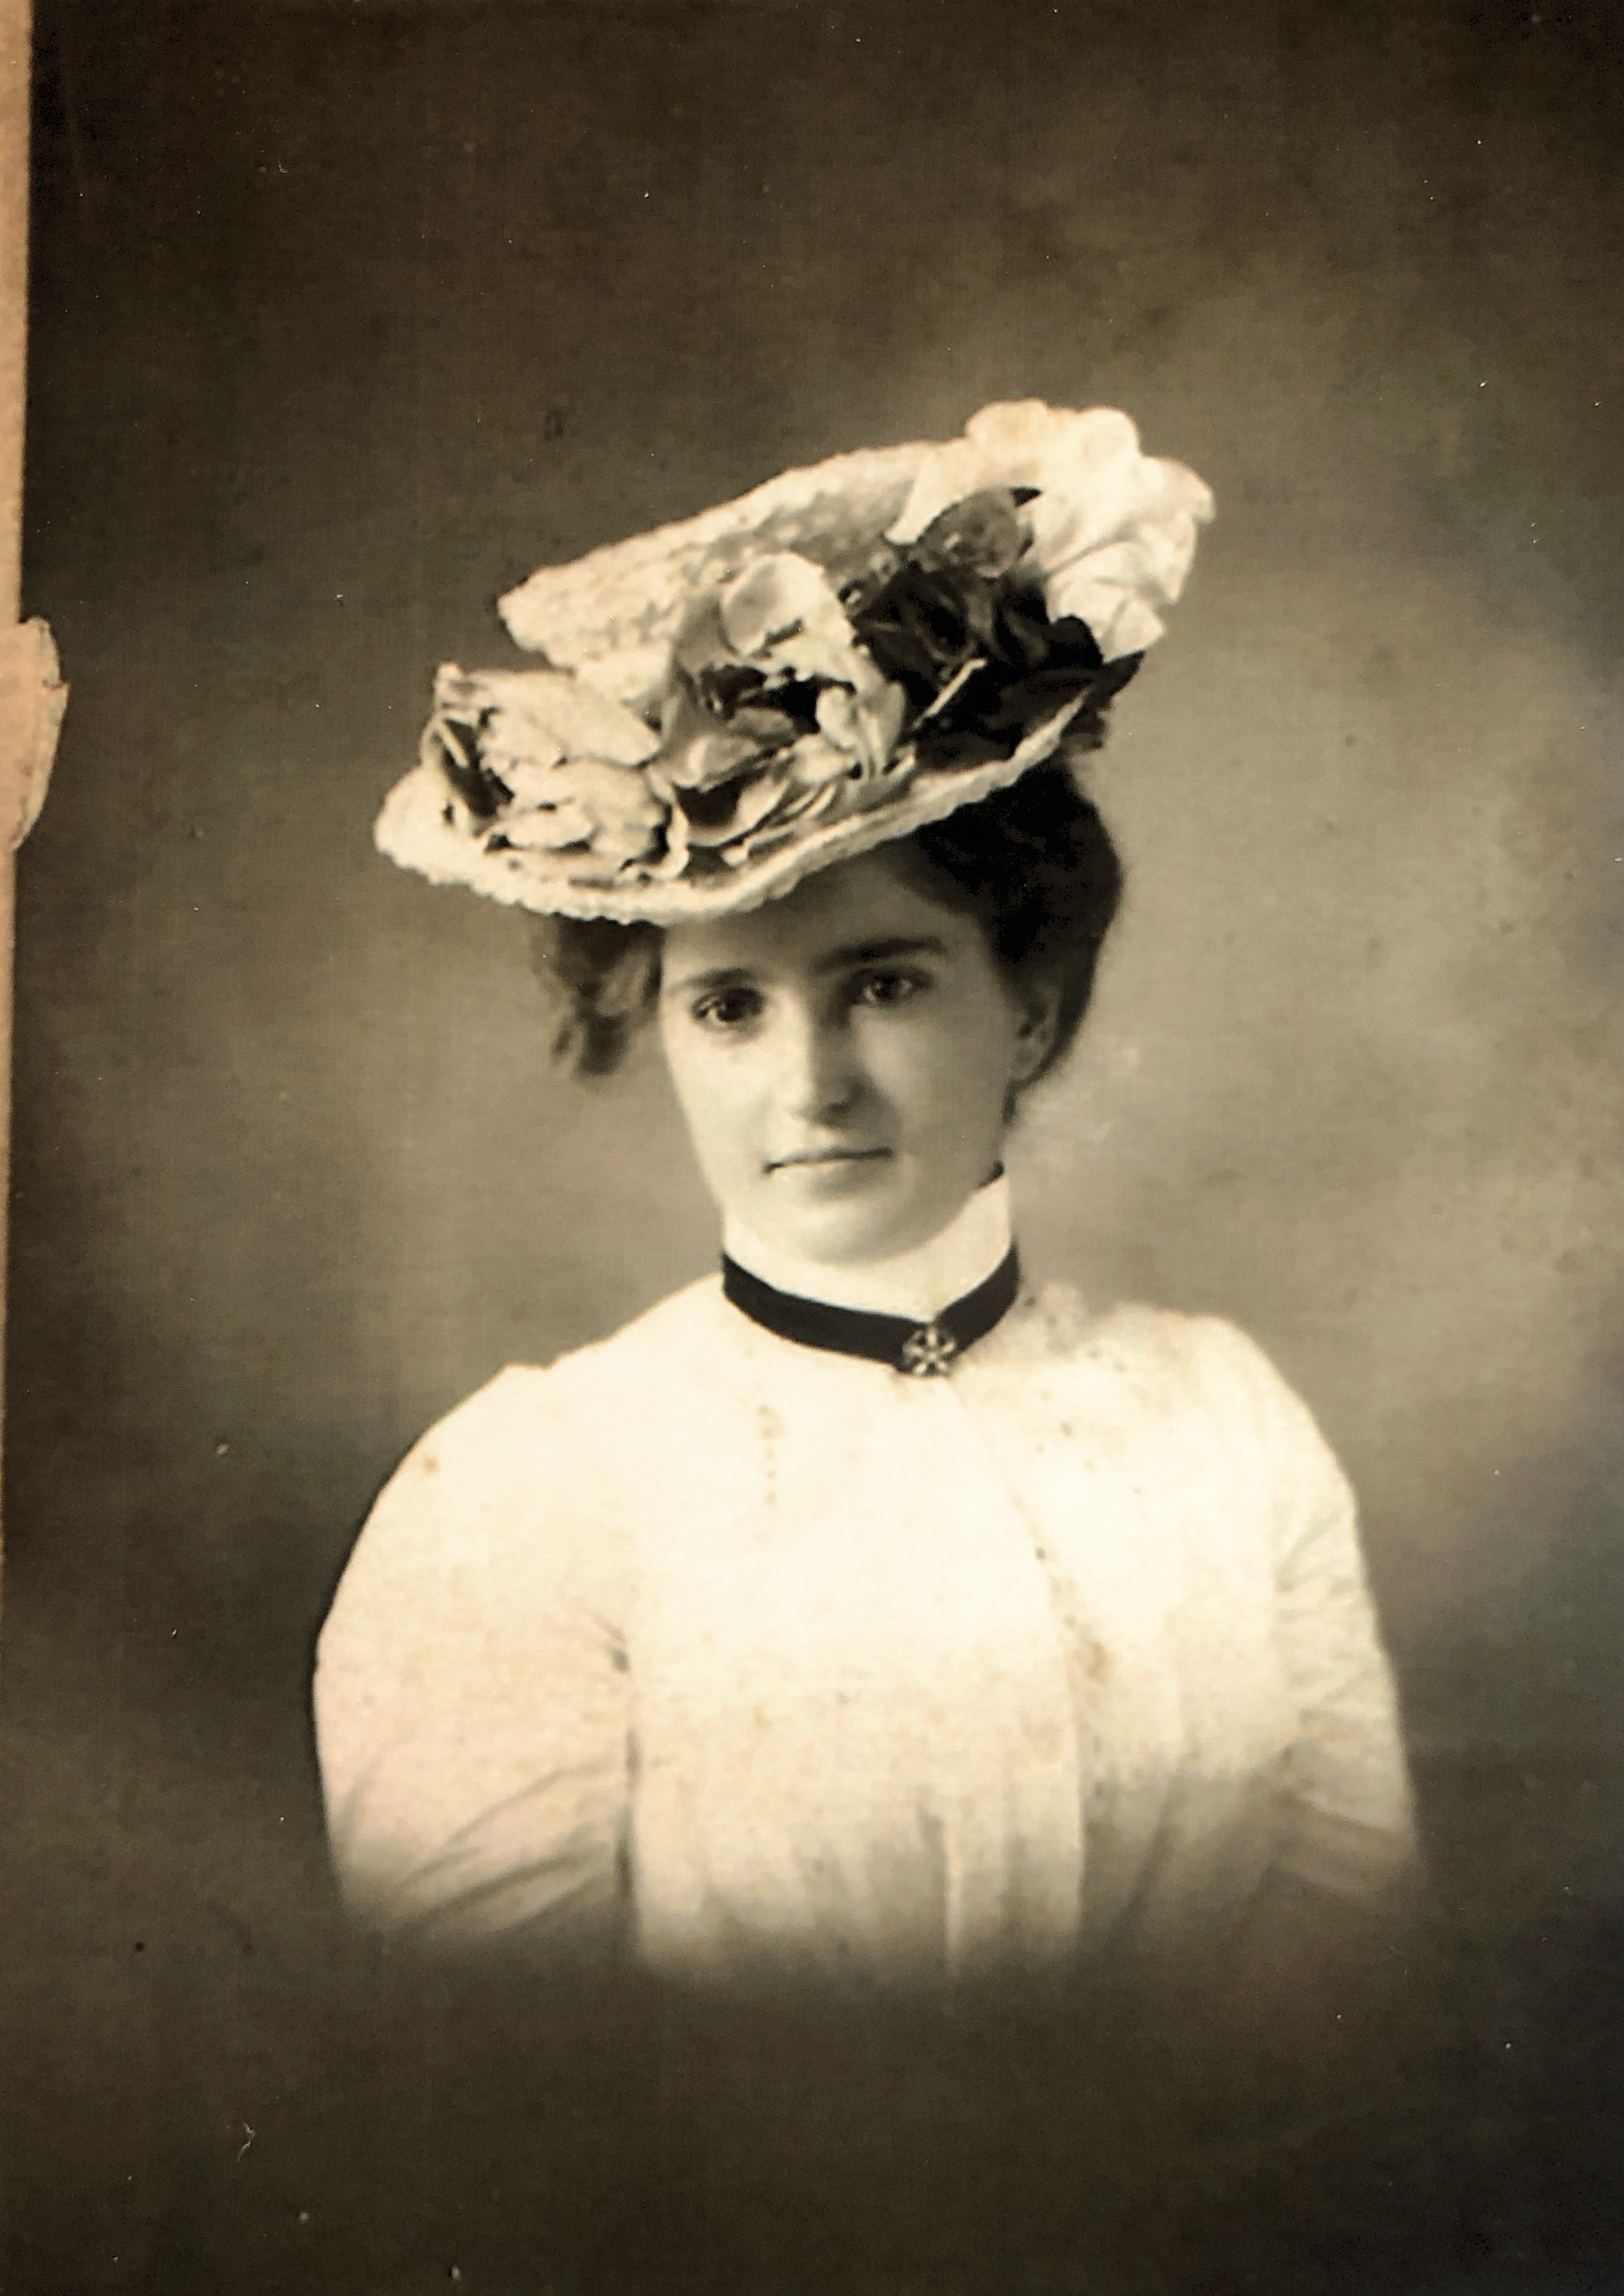 Amelia “Emily” Egley Maxfield.  Died in 1912 from an apparent botched abortion at age 35. Her death is listed as a homicide because they didn’t know the “doctor” that performed it and wanted to prosecute him/her.